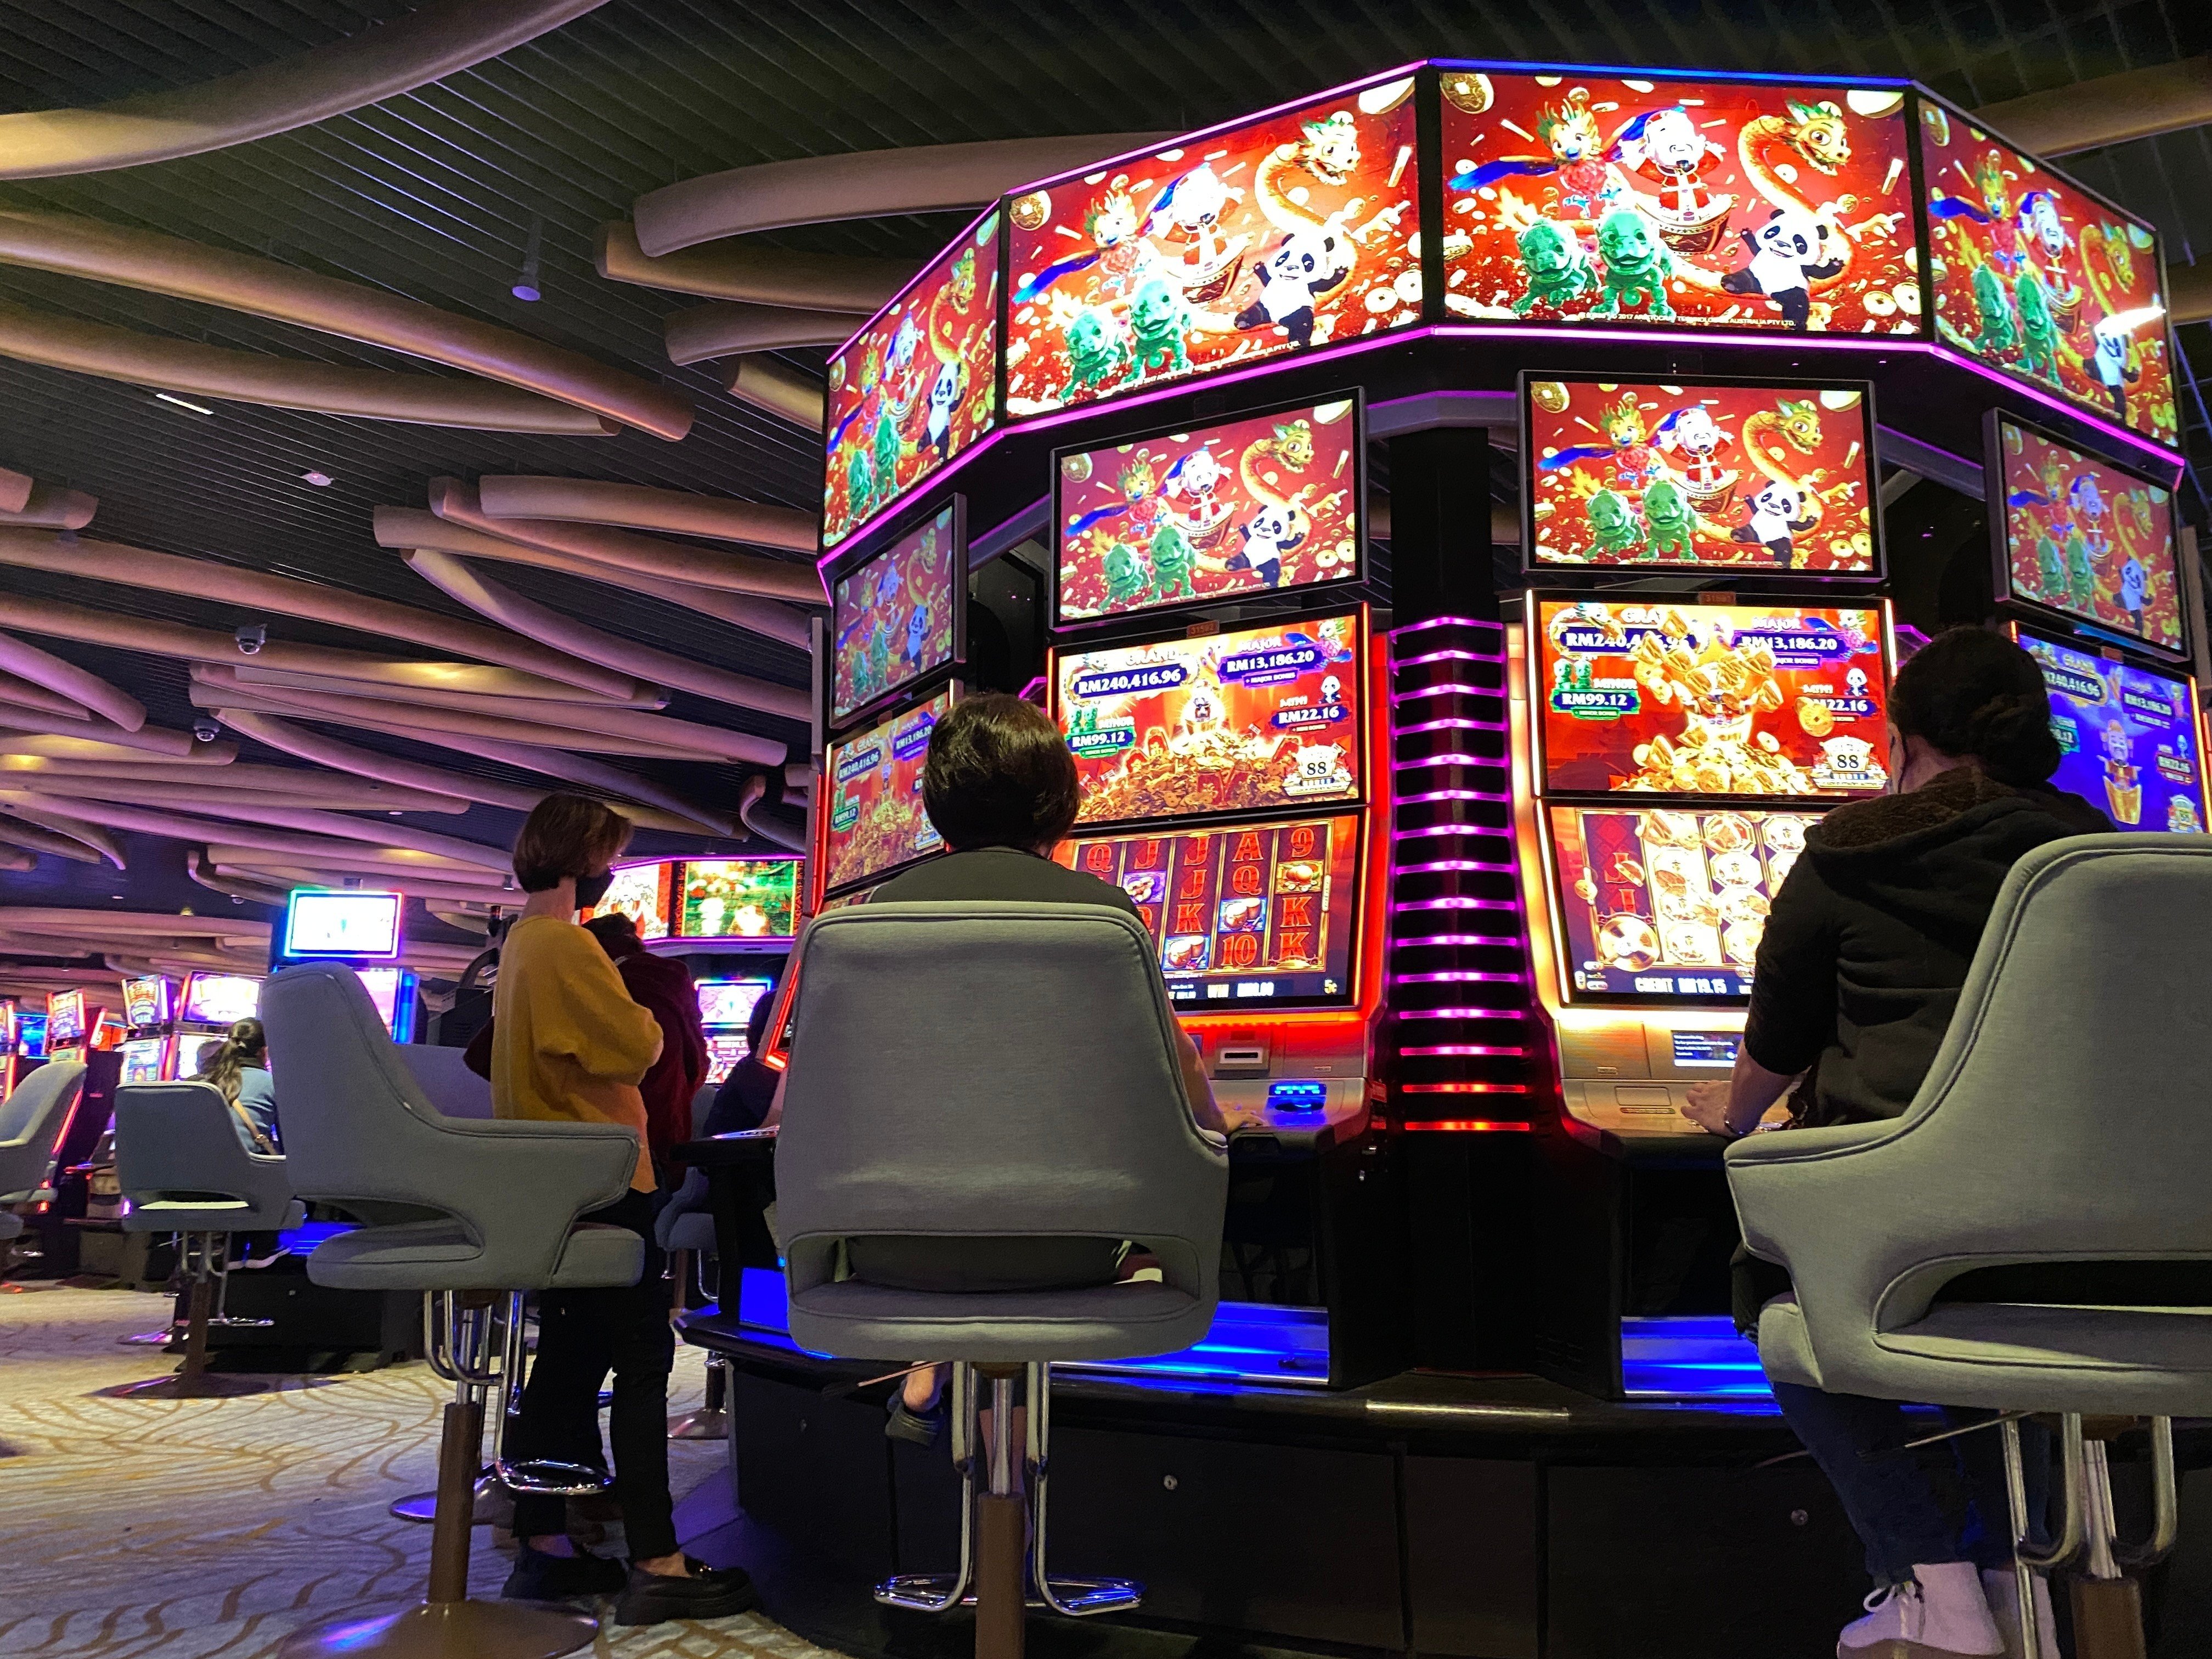 Malaysia has granted only one casino licence, which was given to Genting in 1969. Photo: Shutterstock